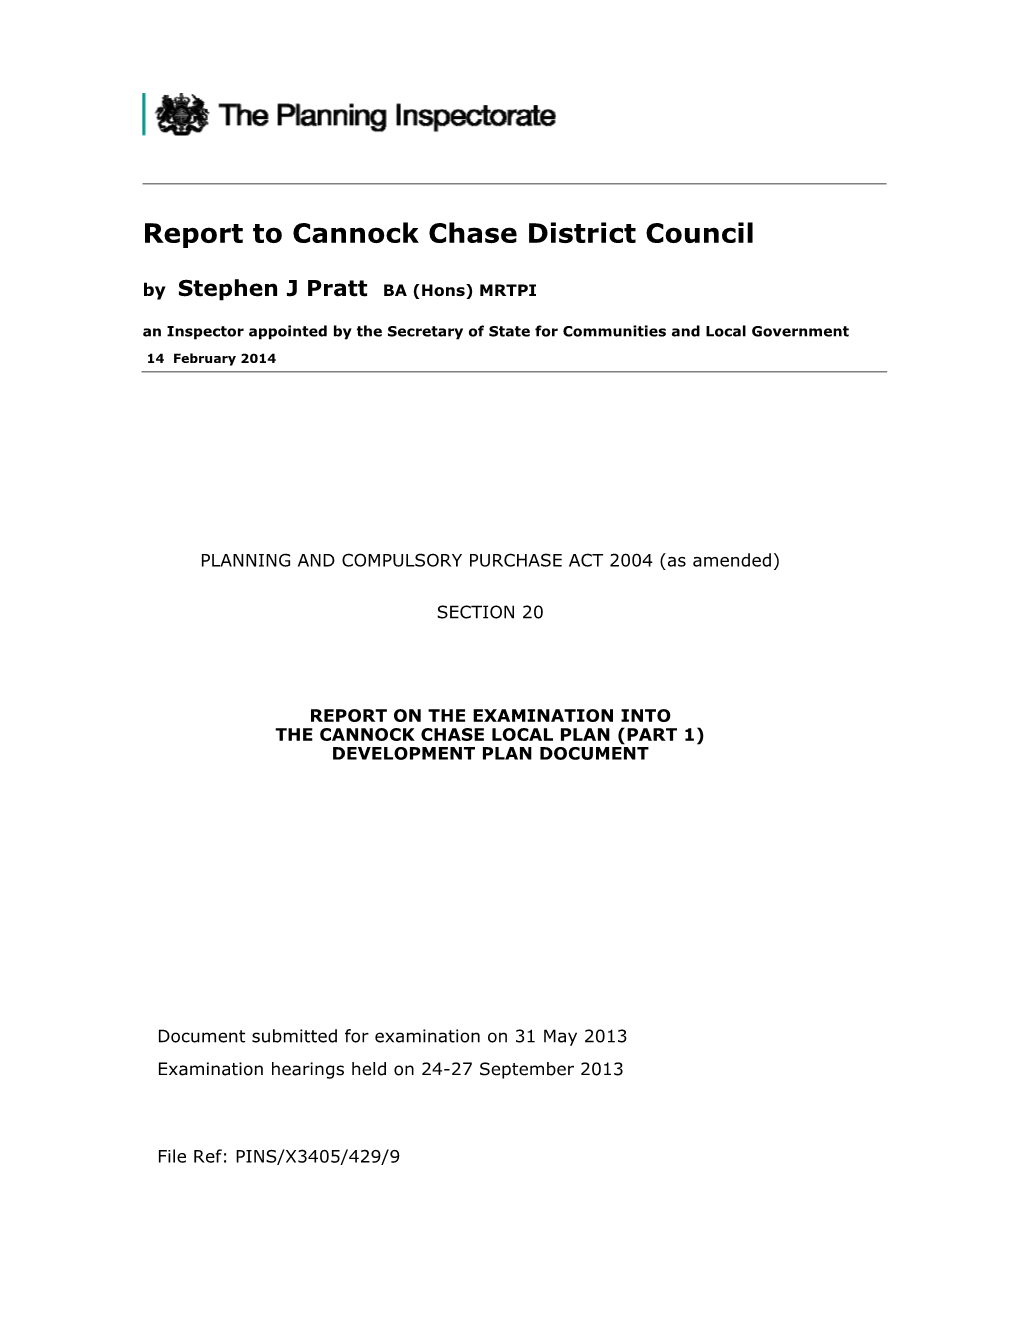 Report to Cannock Chase District Council by Stephen J Pratt BA (Hons) MRTPI an Inspector Appointed by the Secretary of State for Communities and Local Government